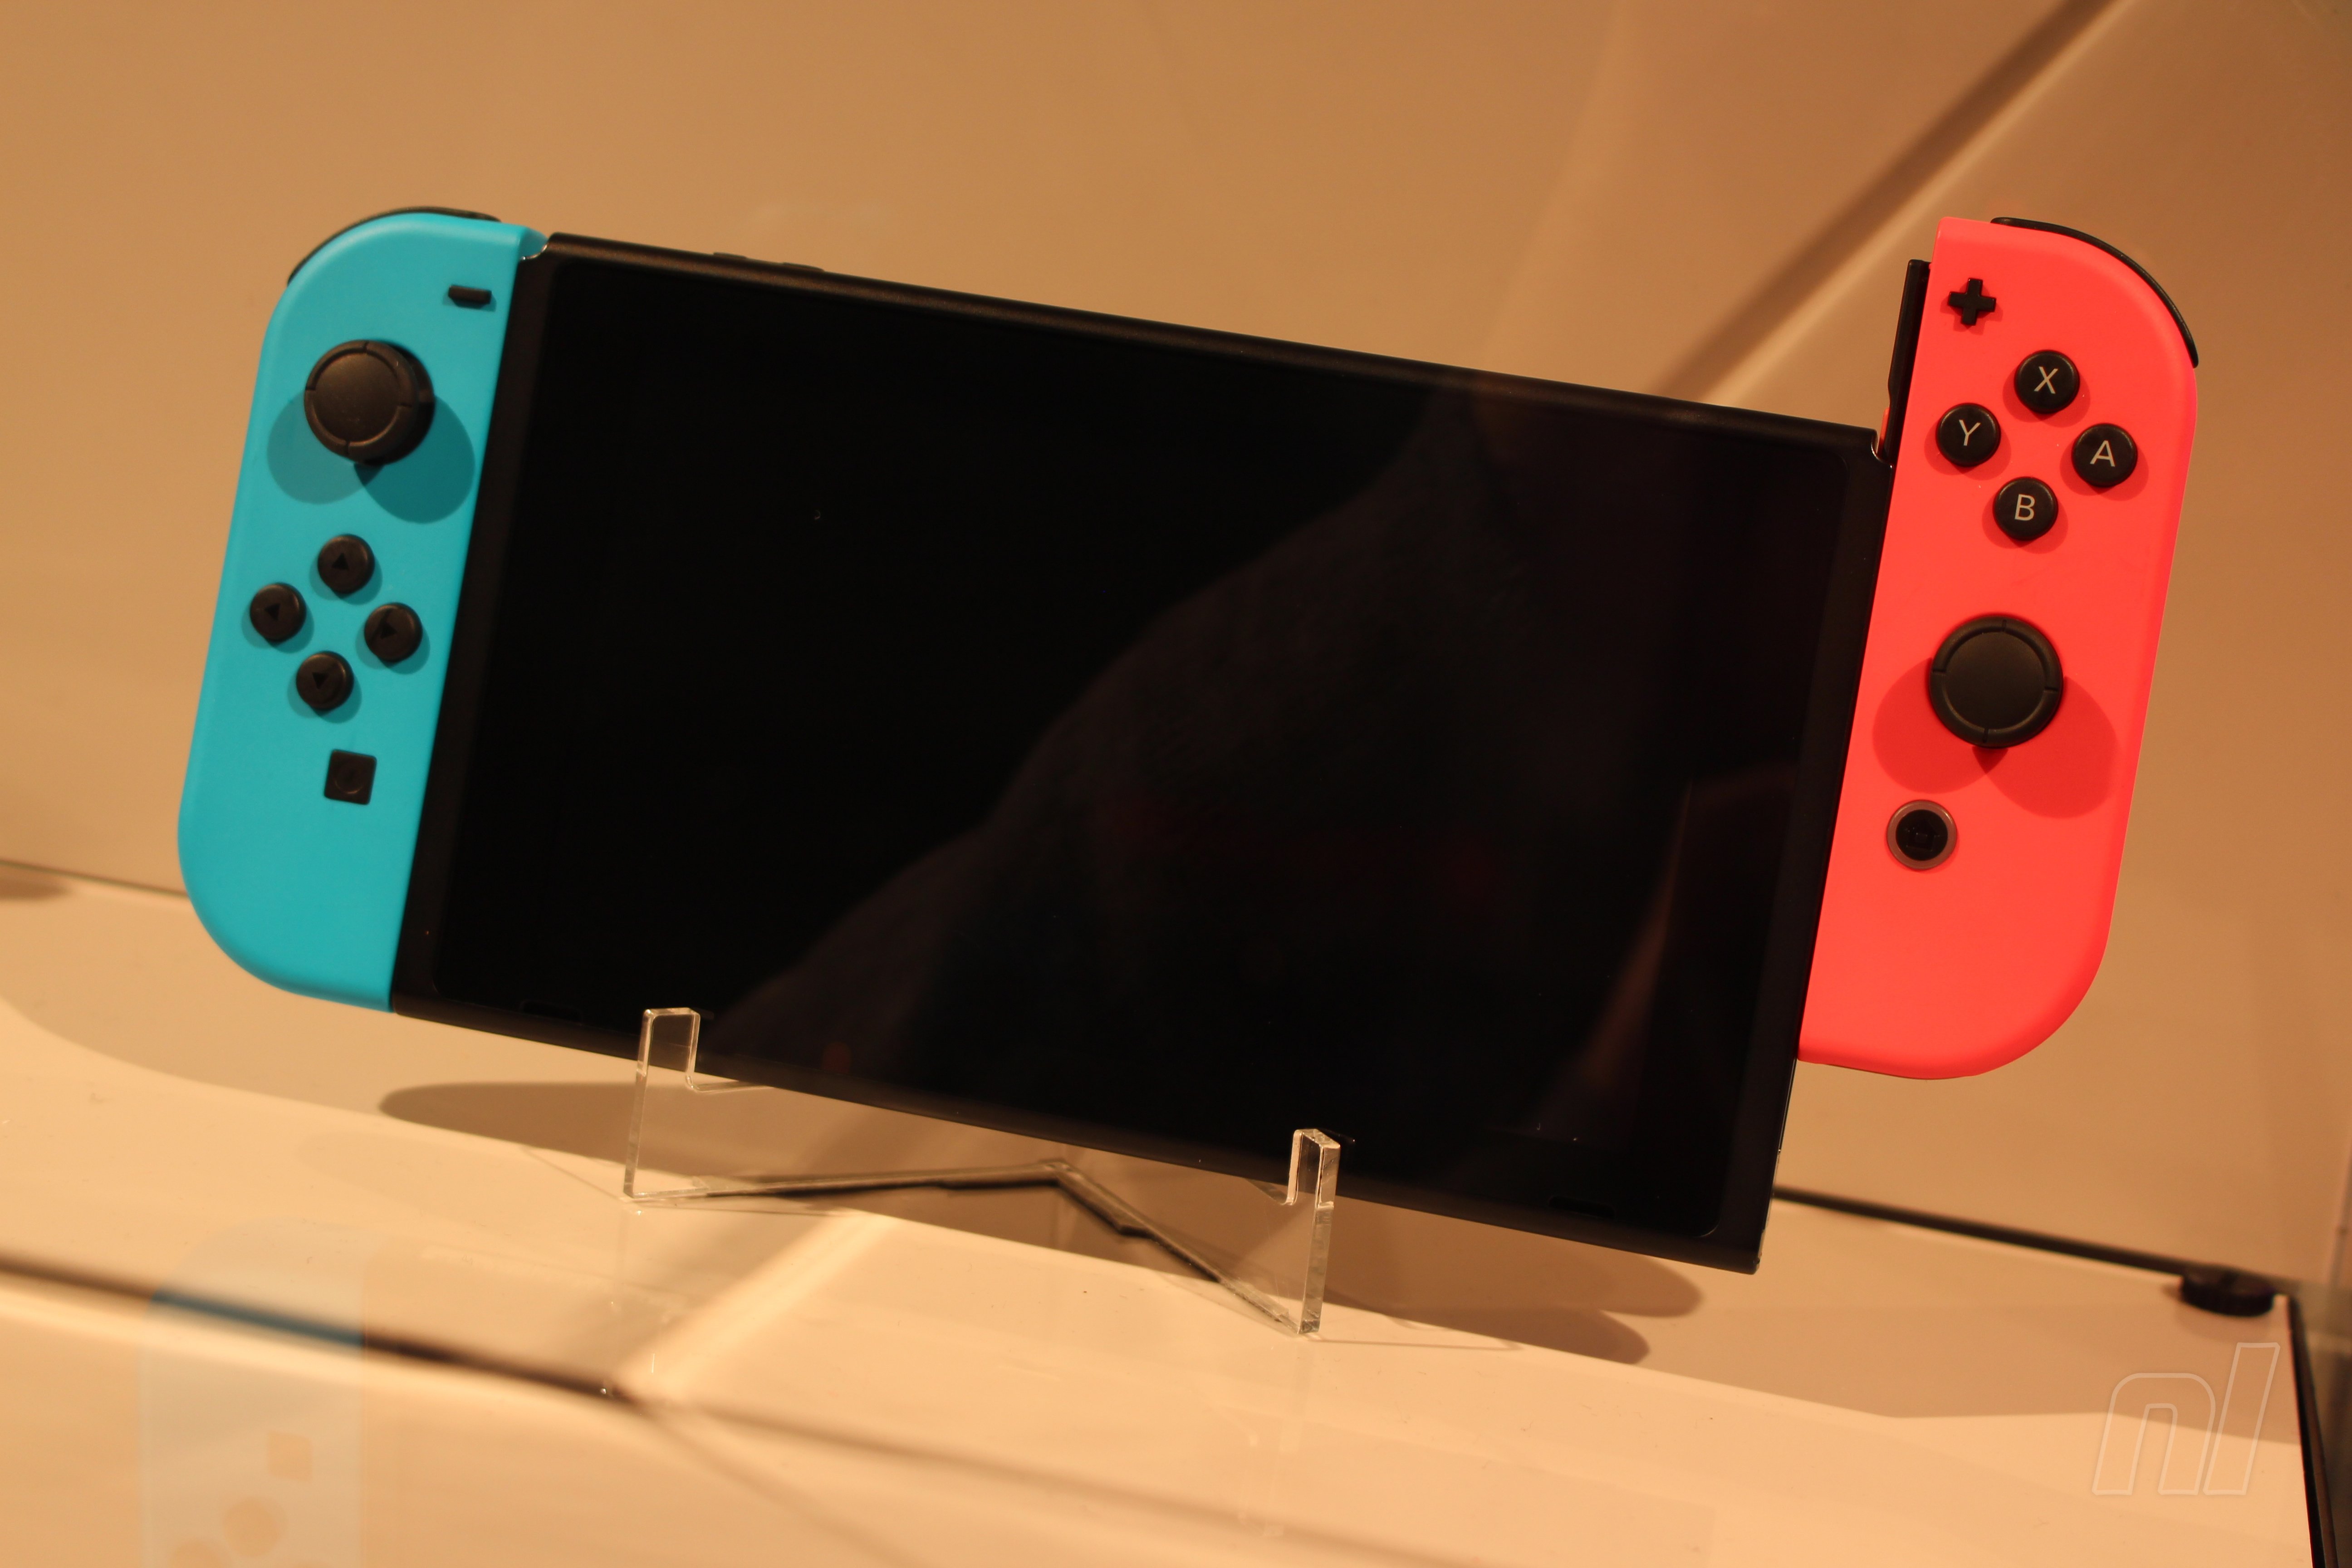 Gallery: Here's What The Nintendo Switch Looks Like From (Almost) Every